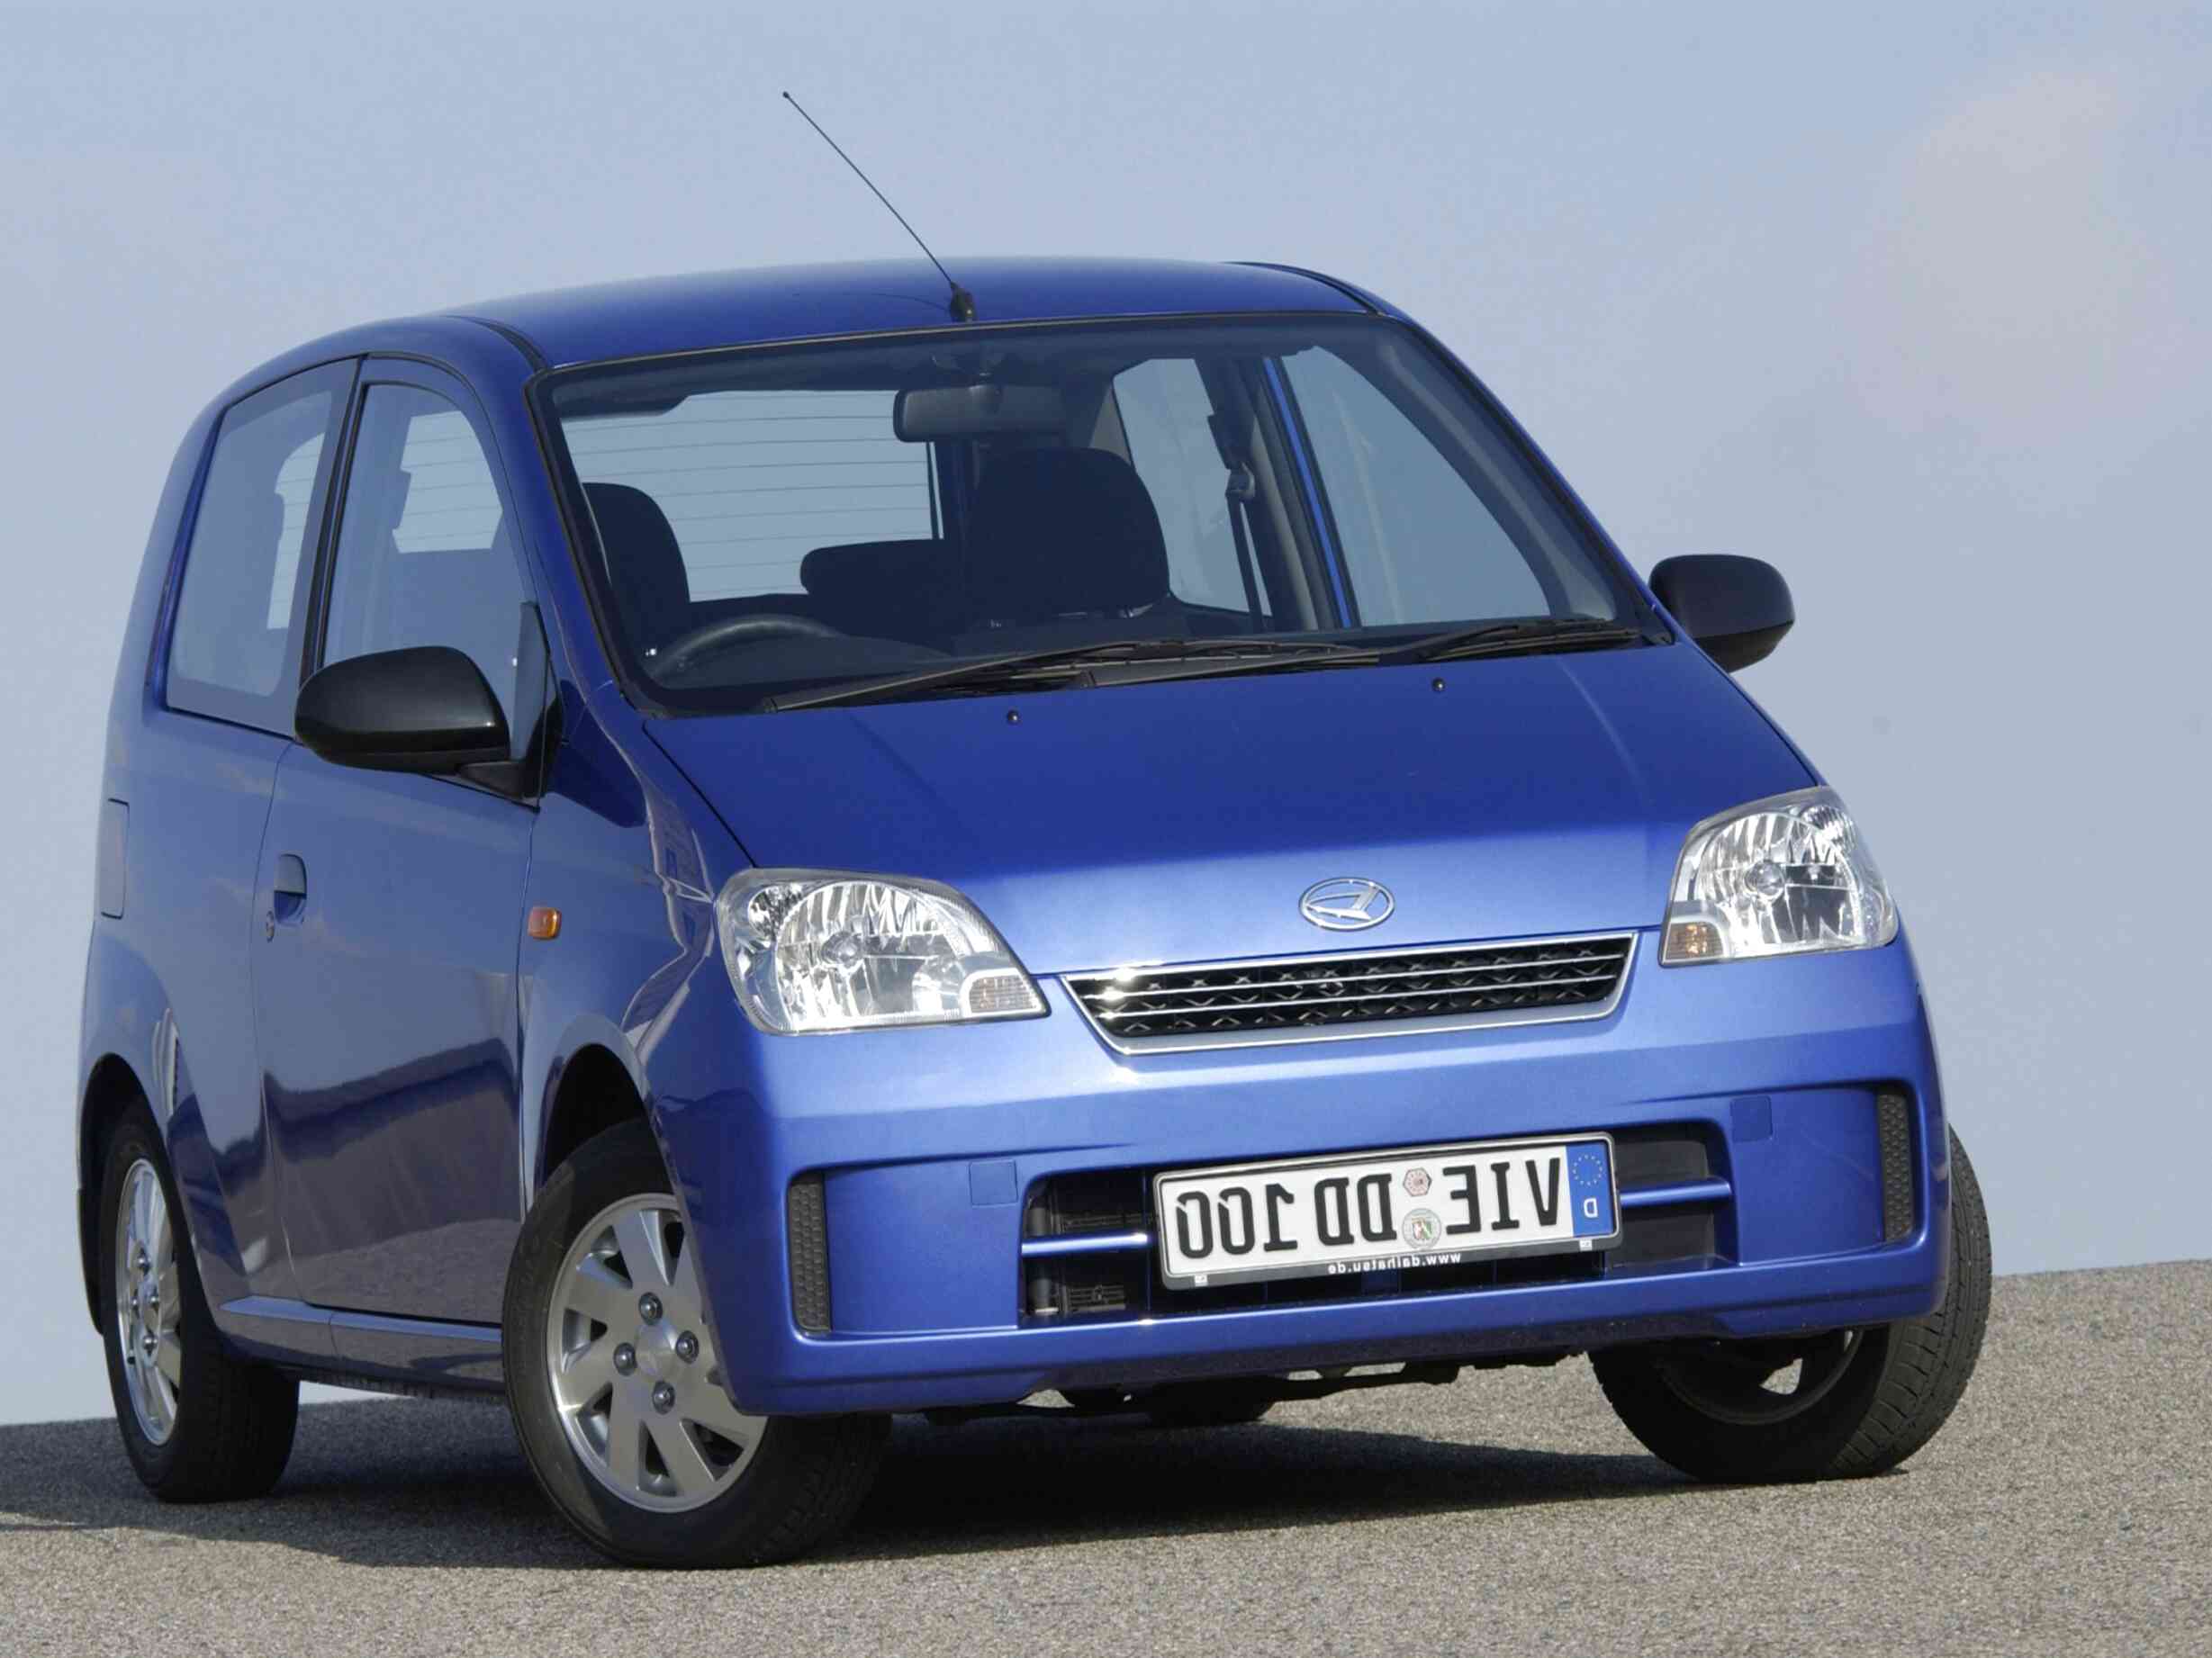 Daihatsu Cuore Parts for sale in UK  View 54 bargains